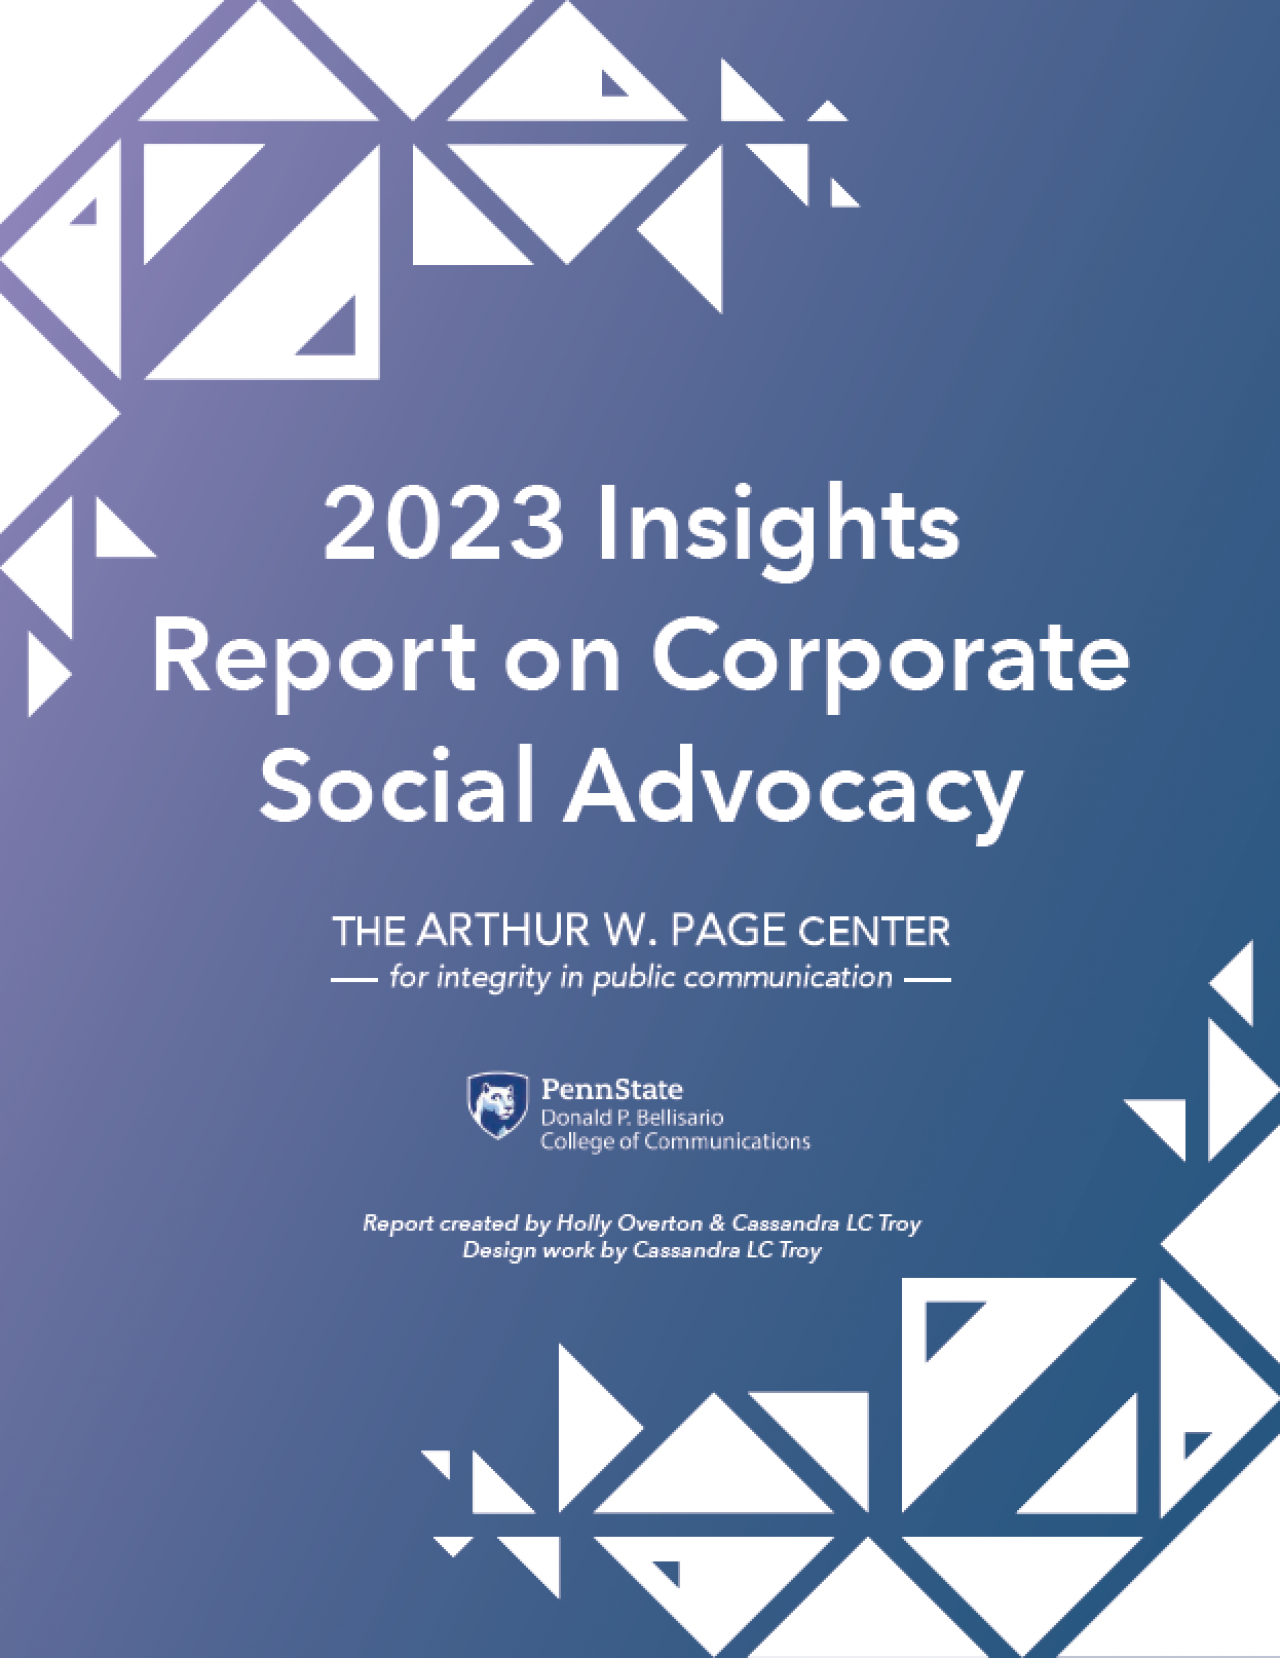 Purple and blue gradient background with the words 2023 Insights Report on Corporate Social Advocacy